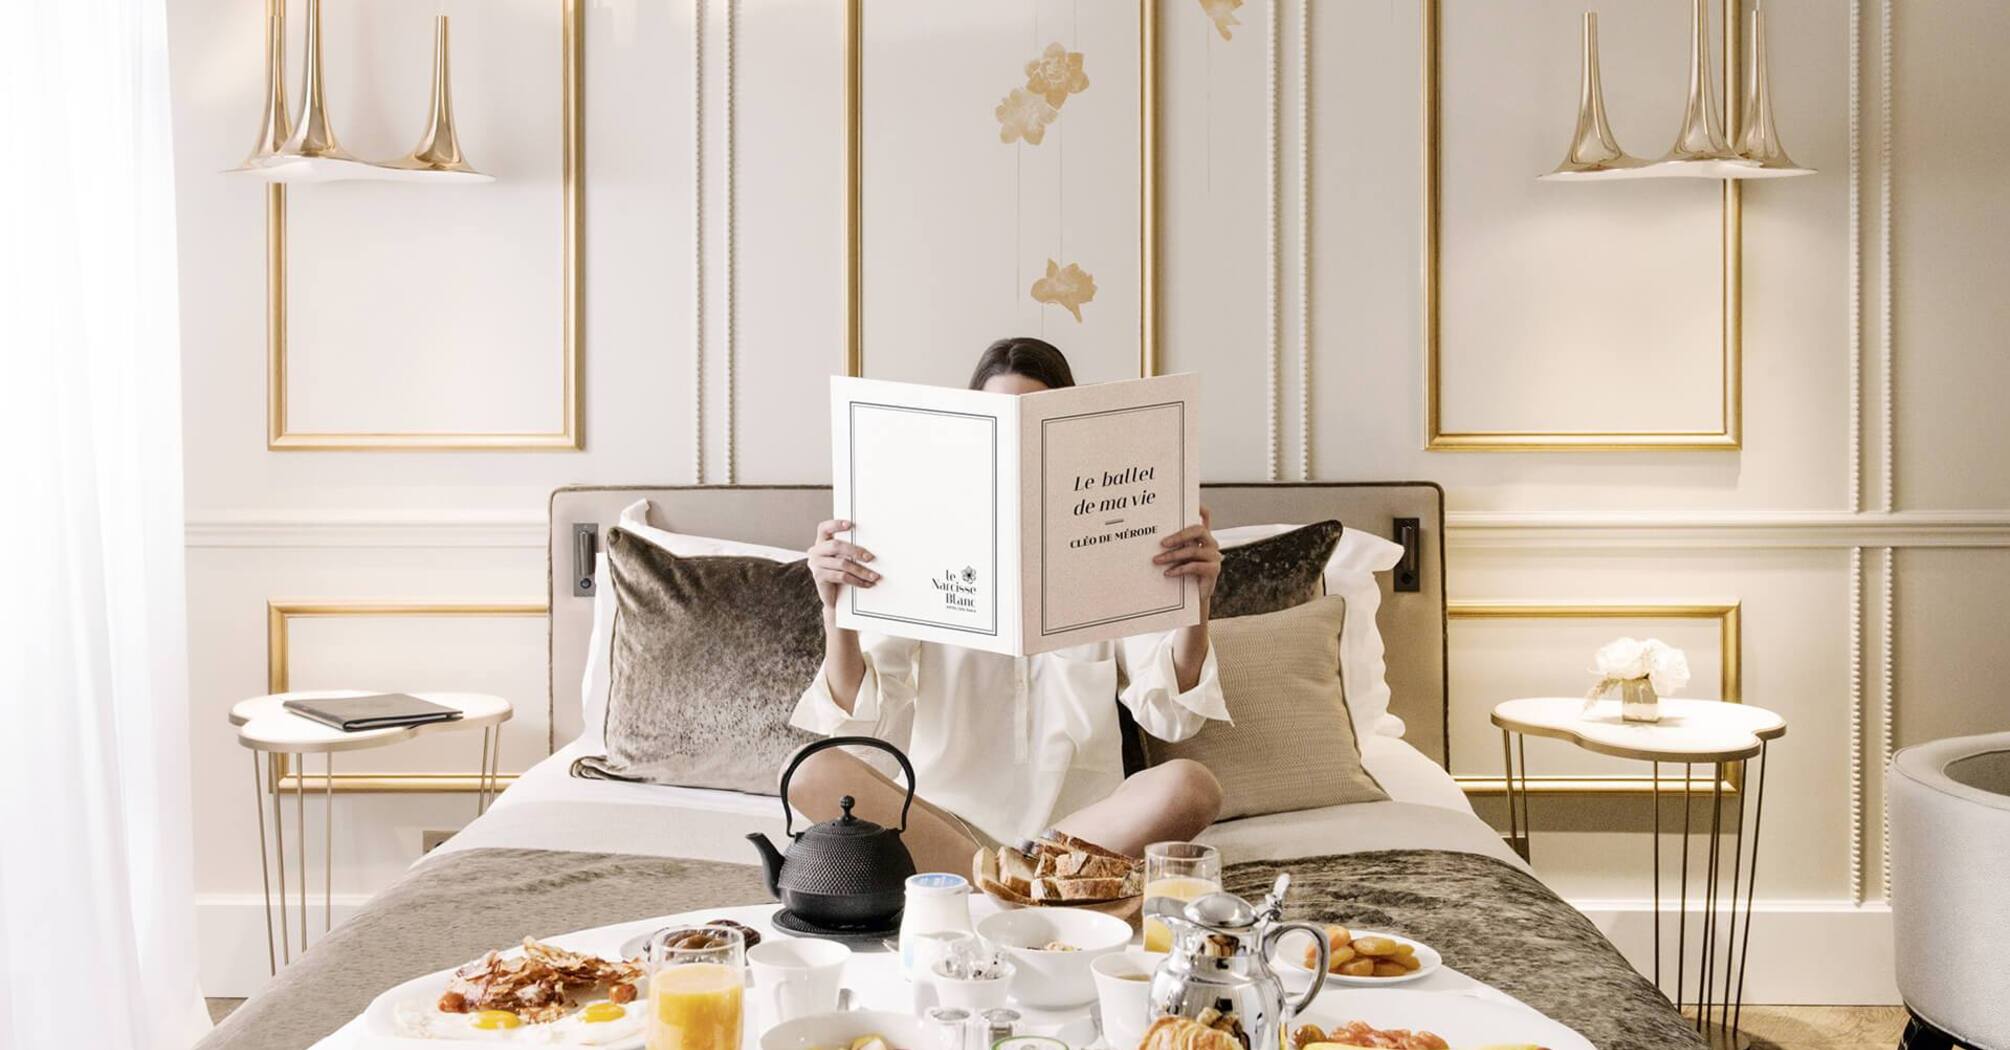 Top 40 hotels in Paris: from luxury spa hotels and trendy designer boutiques to historic townhouses and legendary urban hideaways